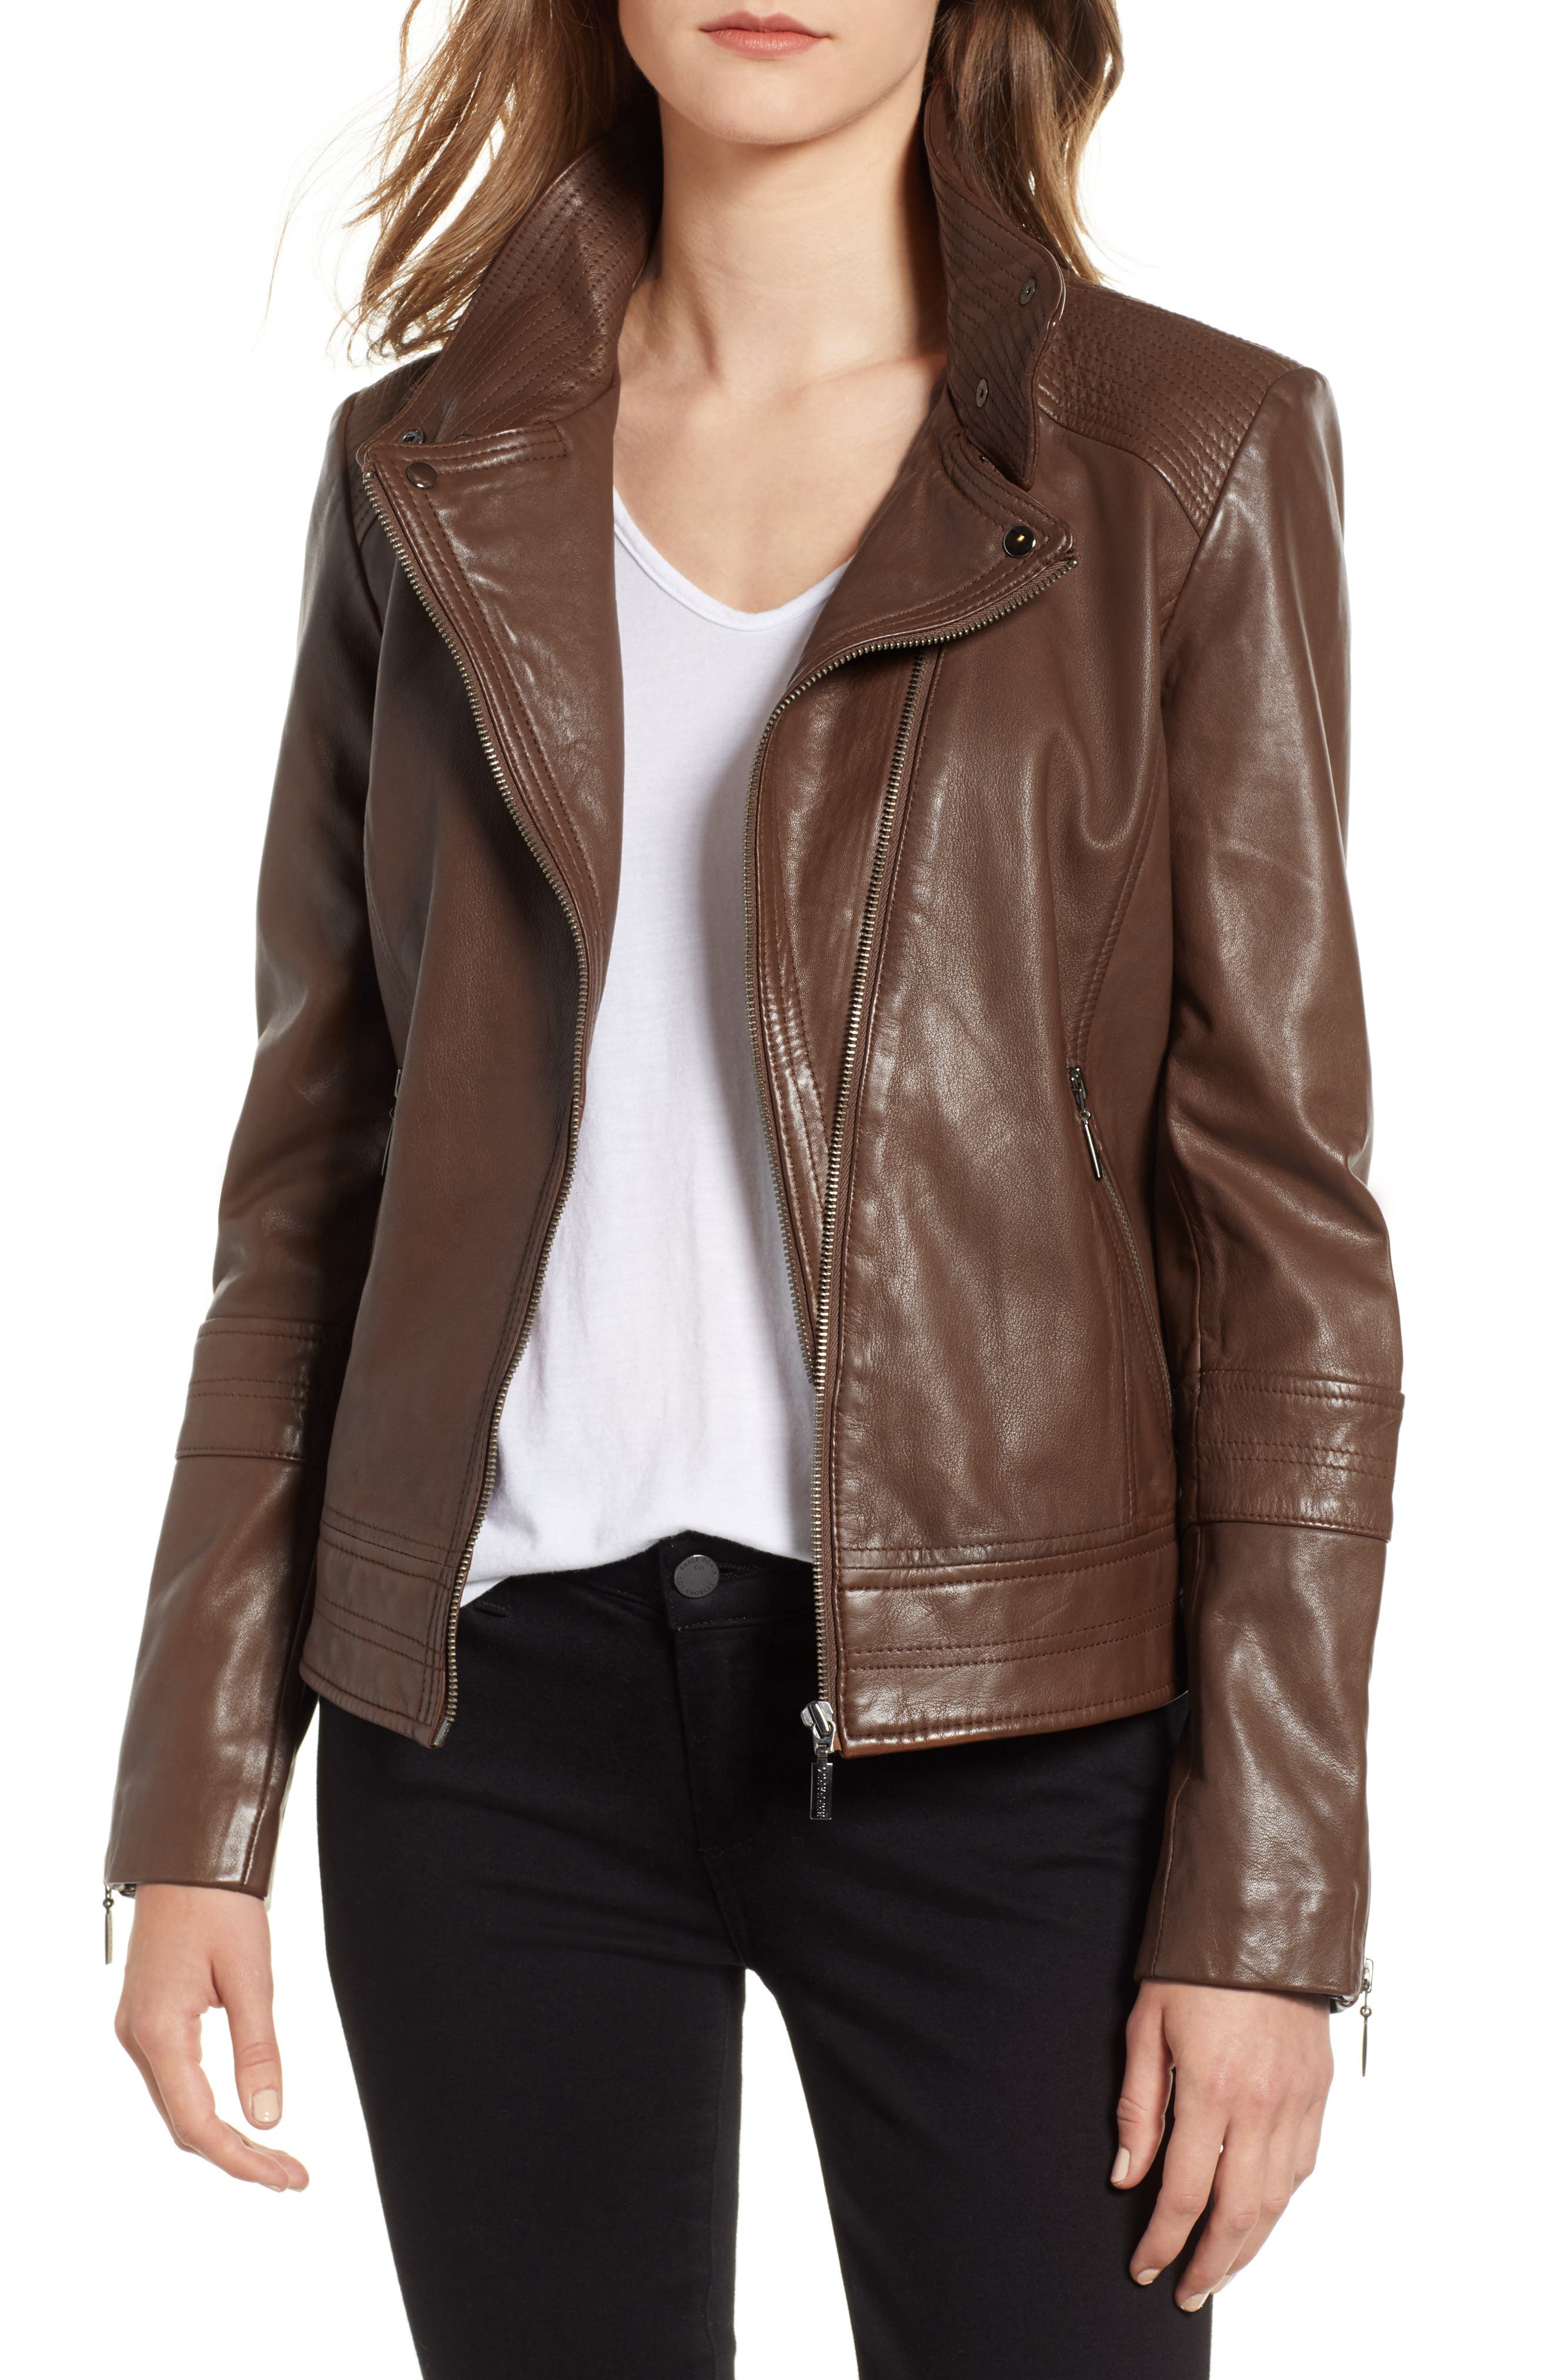 Womens Black Leather Jacket Genuine Lambskin Chocolate Brown Leather Jackets for Women 